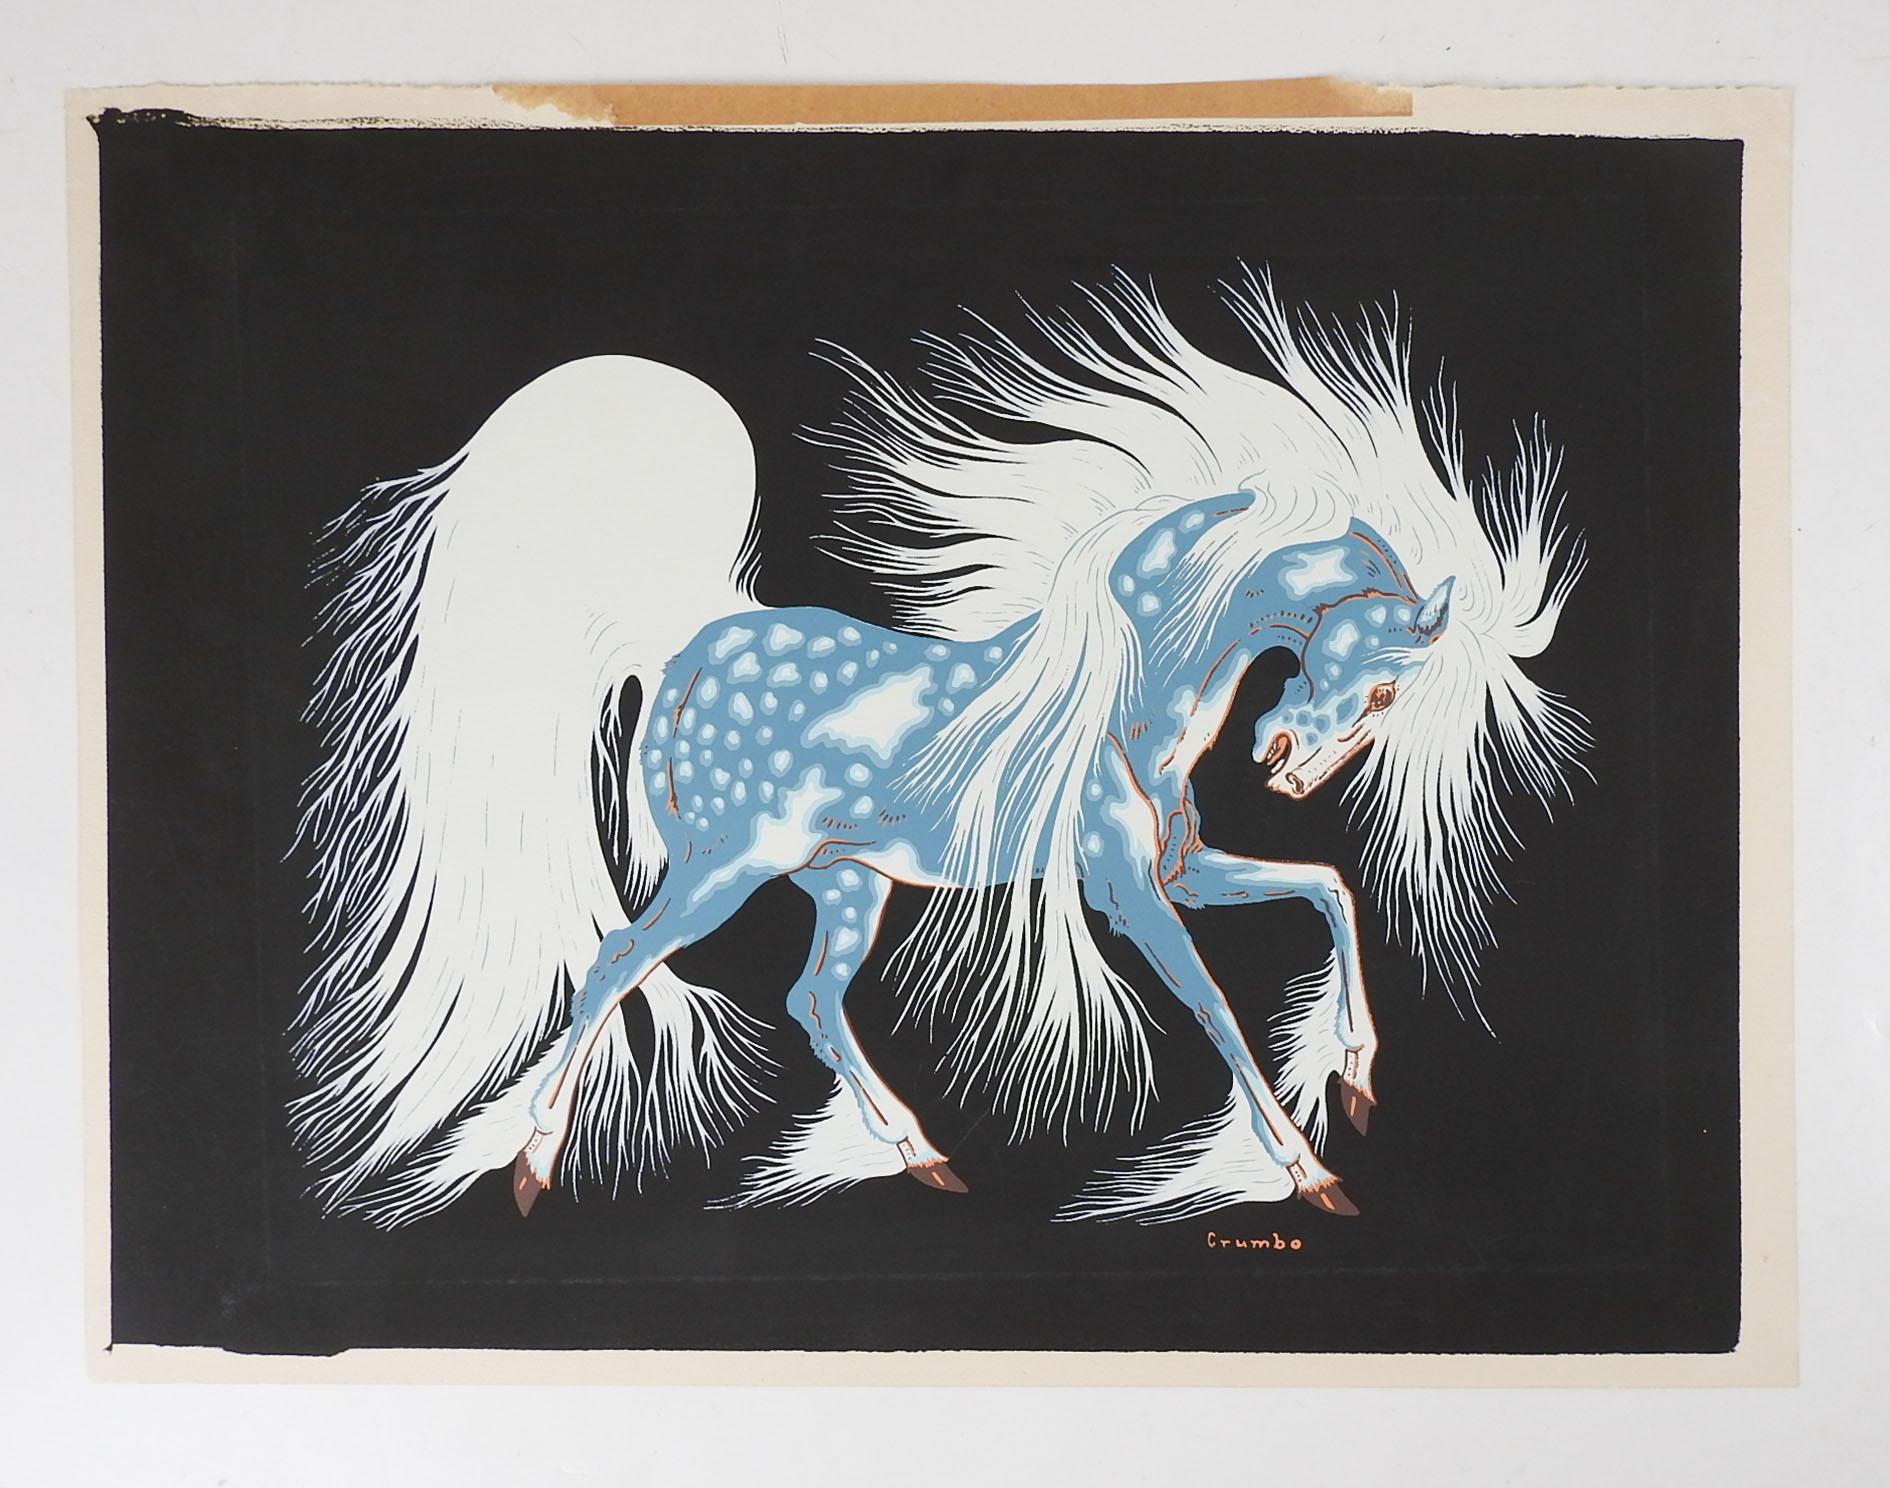 Vintage mid-20th century serigraph on paper of blue and white horse by Woody Crumbo (1919-1989) Potawatomi Tribe, Oklahoma. Signed in print, titled Spirit Horse. Unframed, tape remains along upper edge.